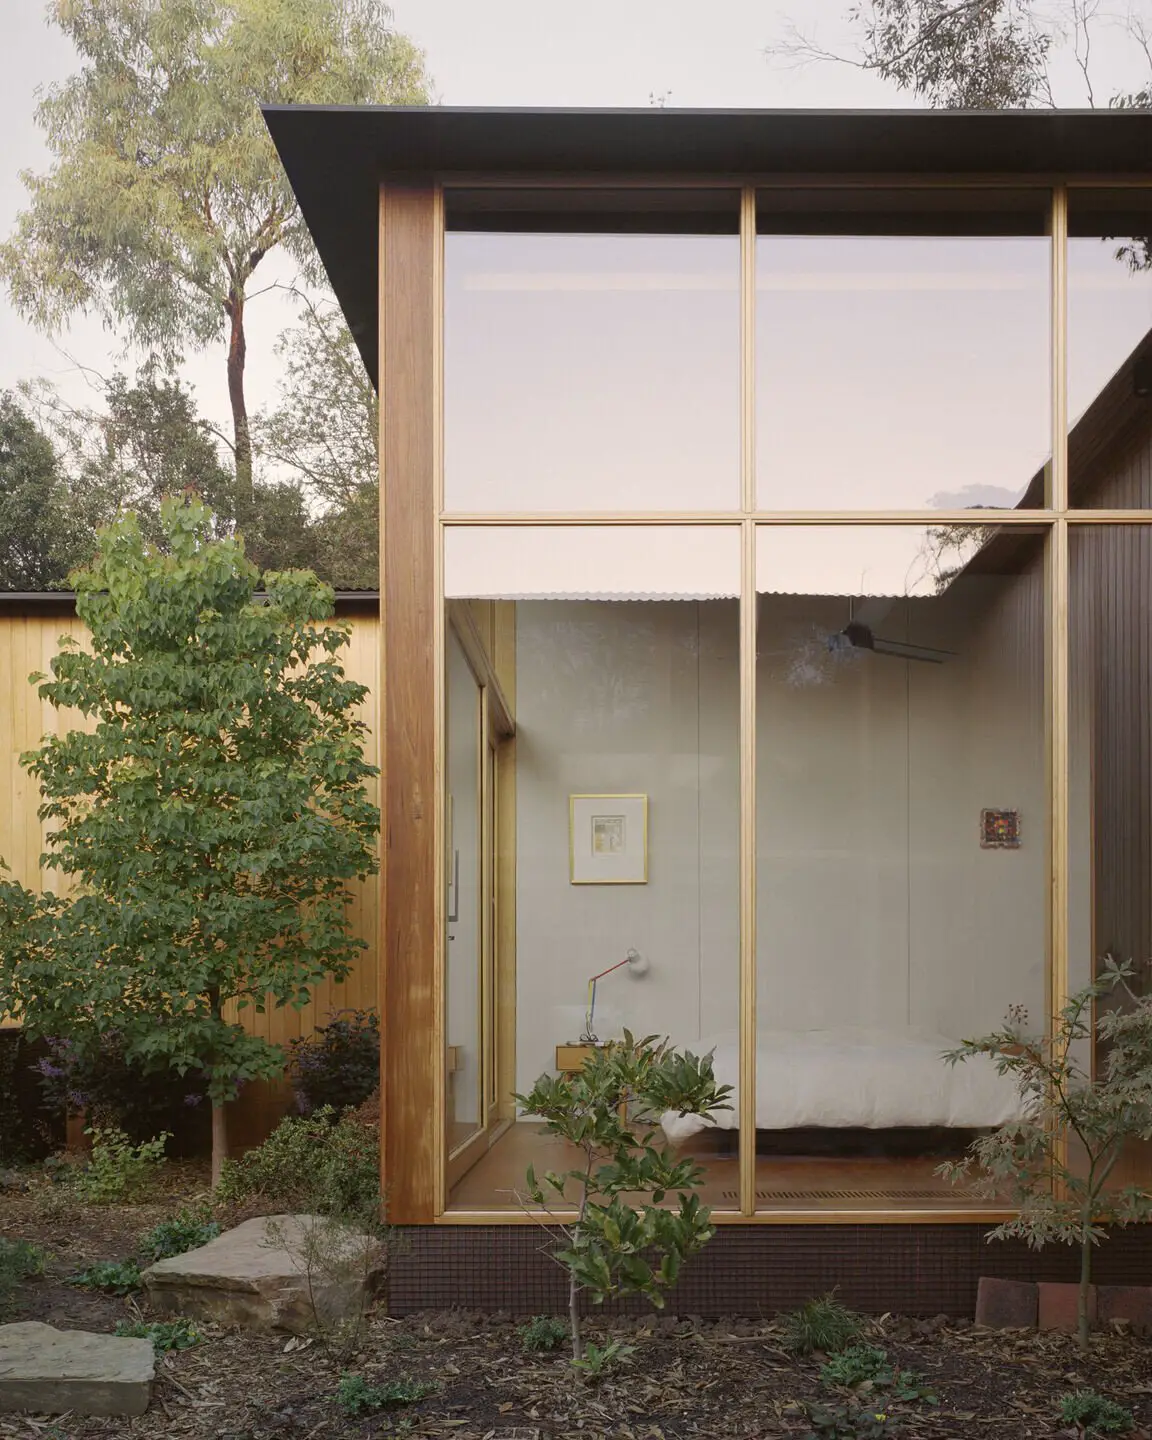 Wood-paneled courtyard house - bedroom view